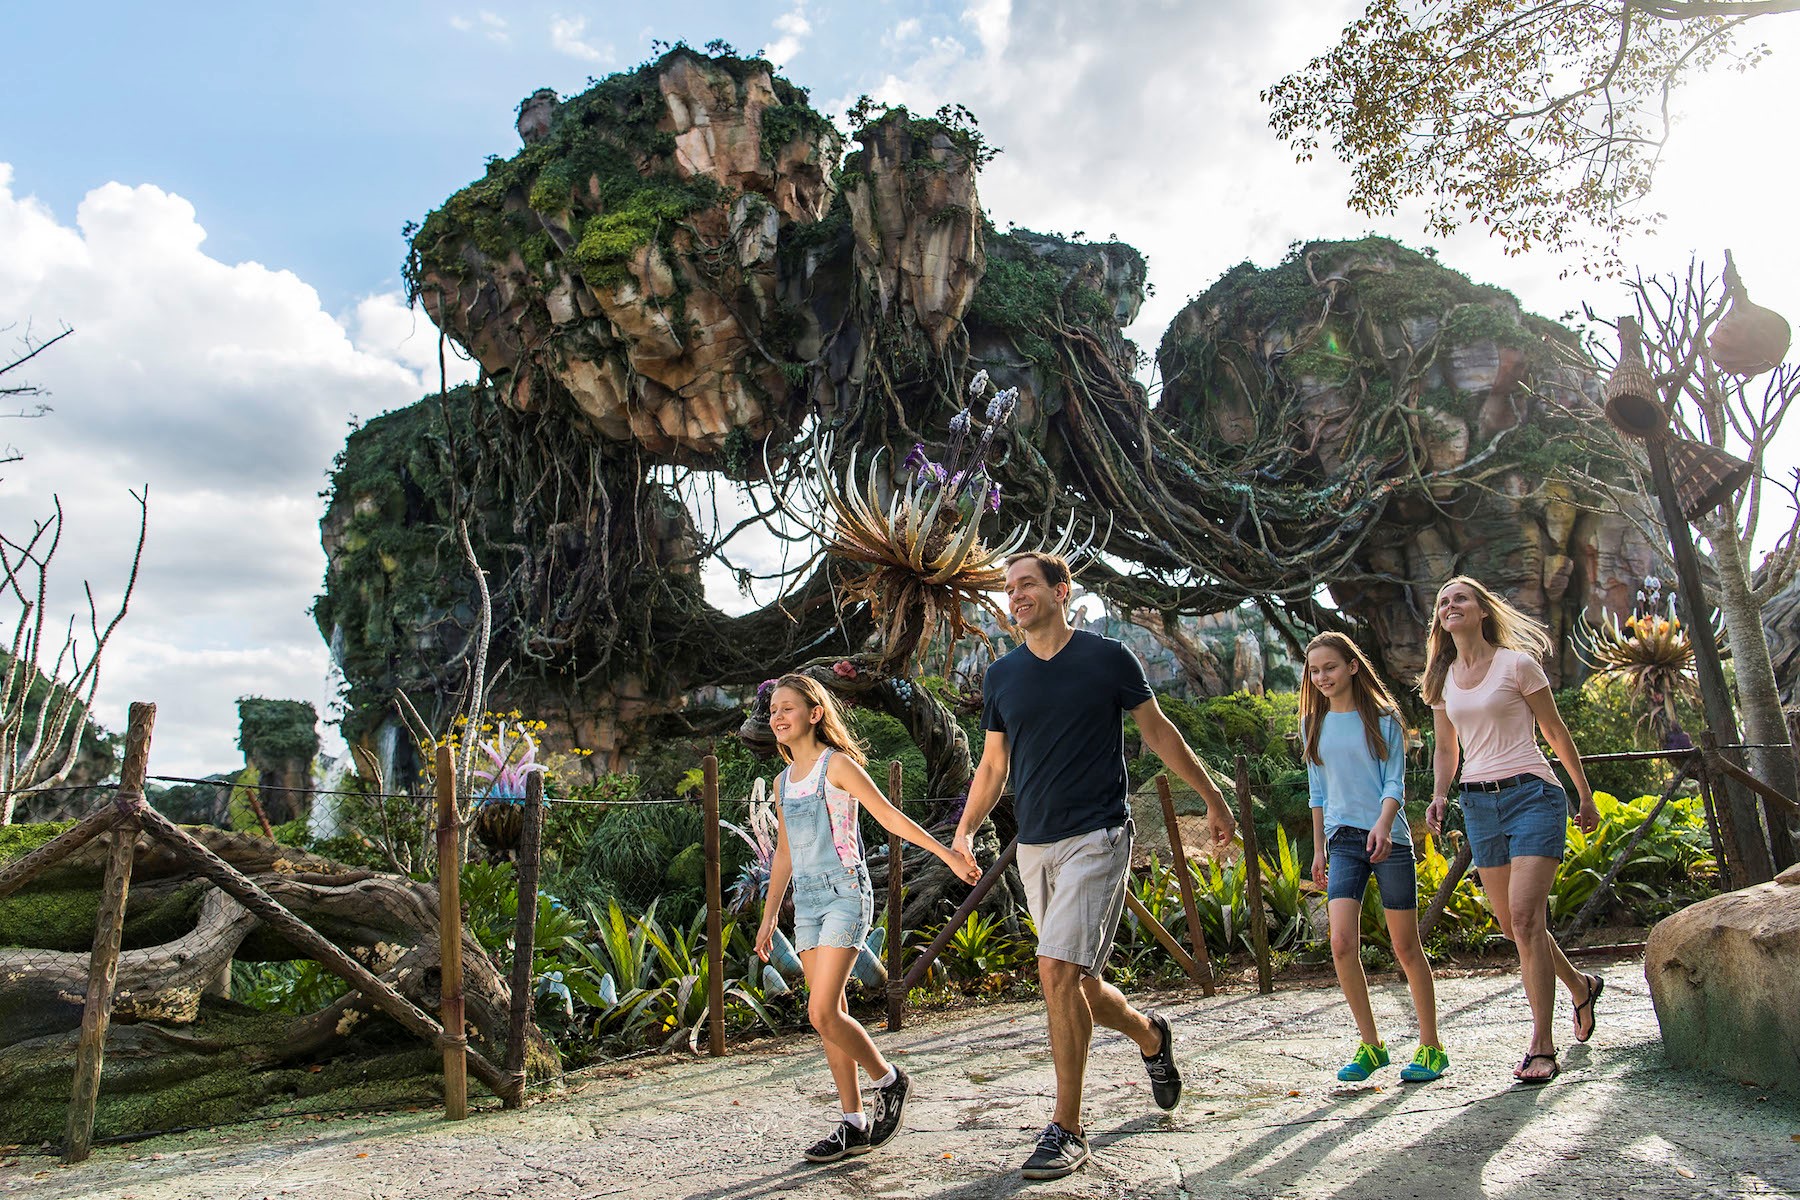 TIME Magazine Recognizes Pandora – The World of Avatar as Best of the Best 